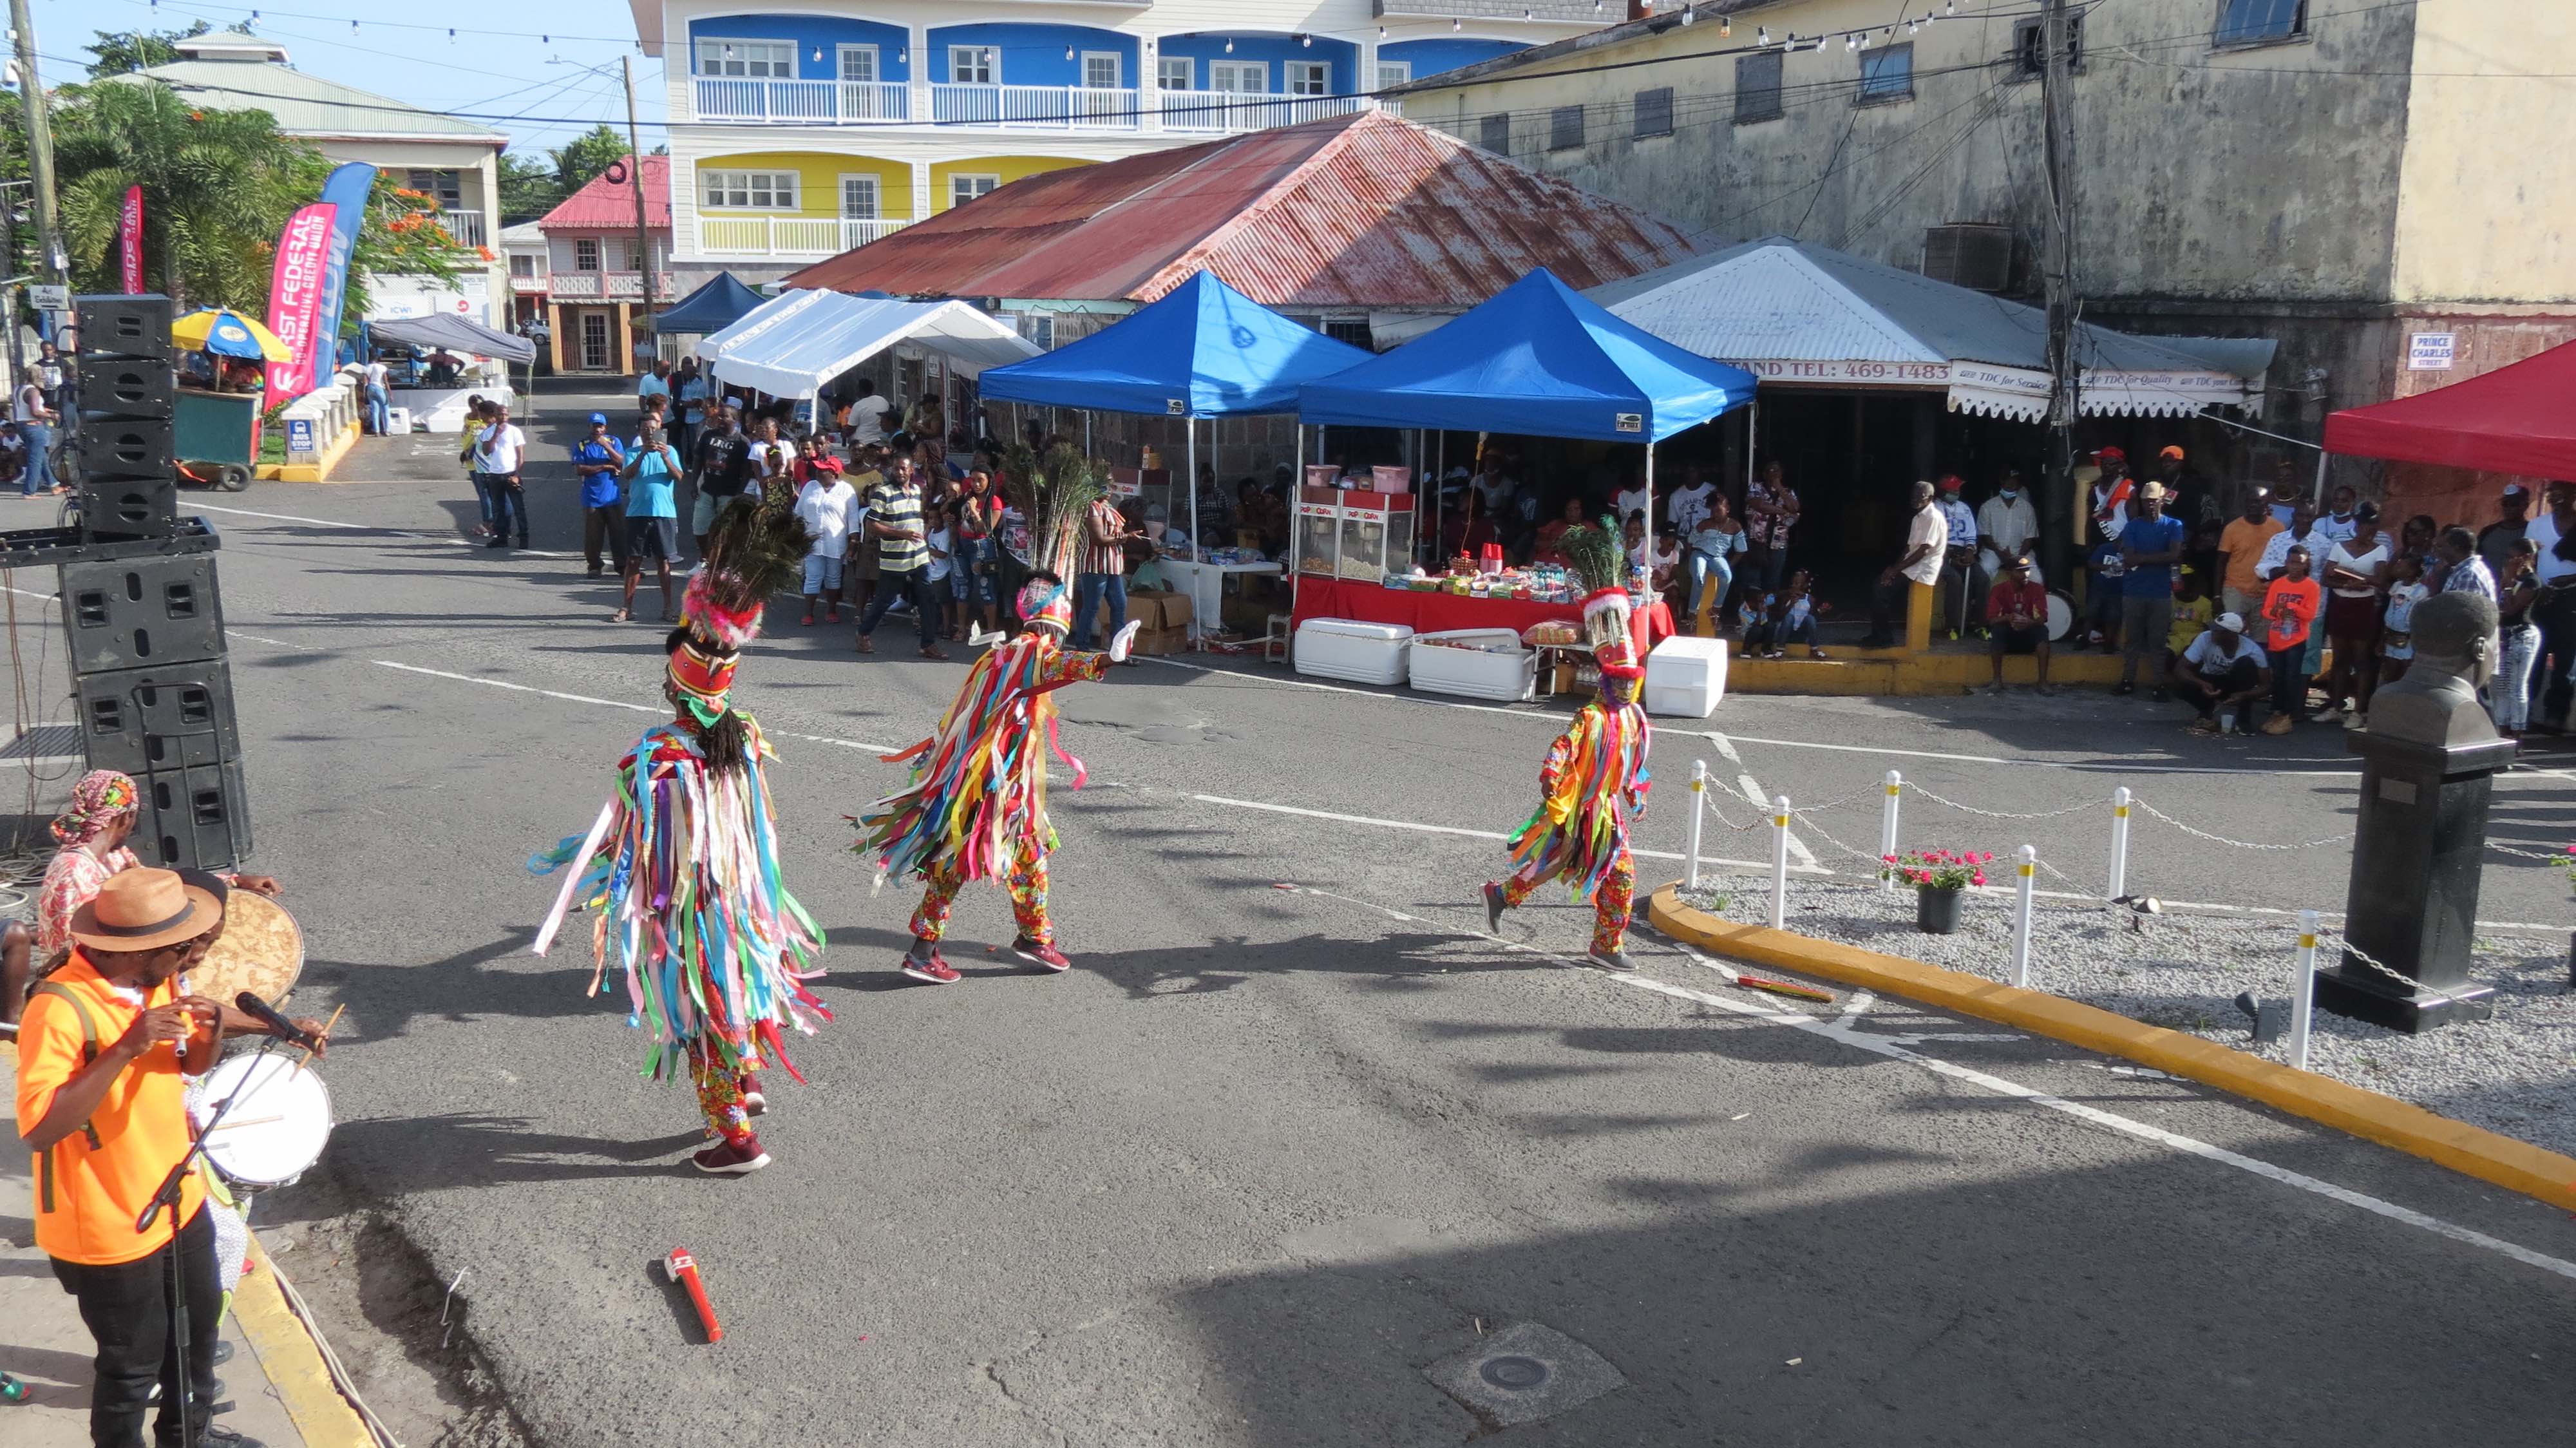 Masqueraders performing in Charlestown during the Emancipation Celebrations on August 03, 2020 (photo by Lester Blackett)